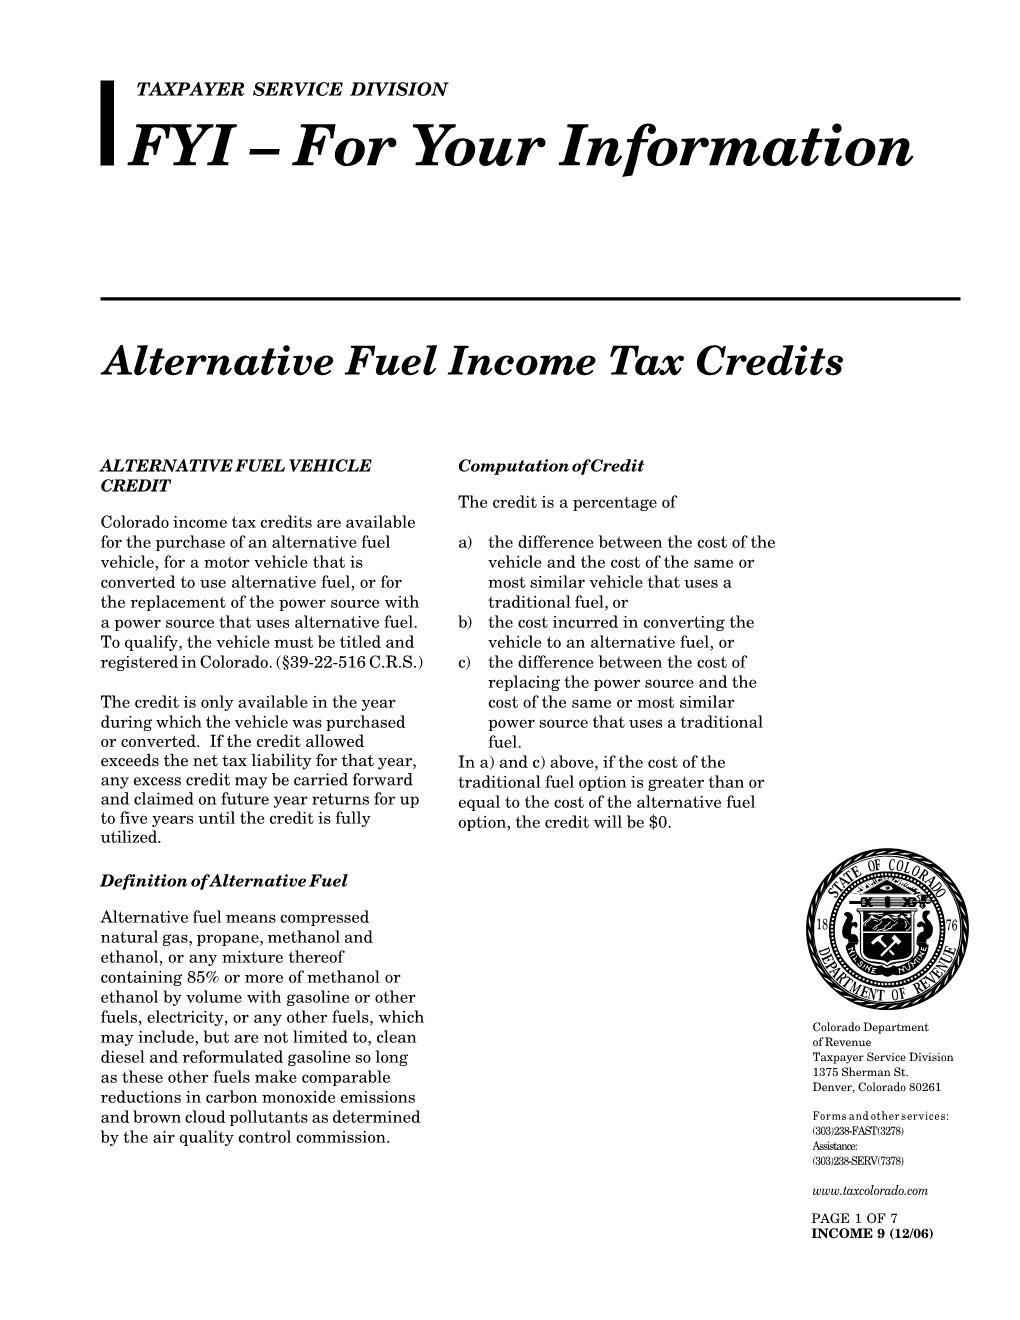 Alternative Fuel Income Tax Credits FYI – for Your Information